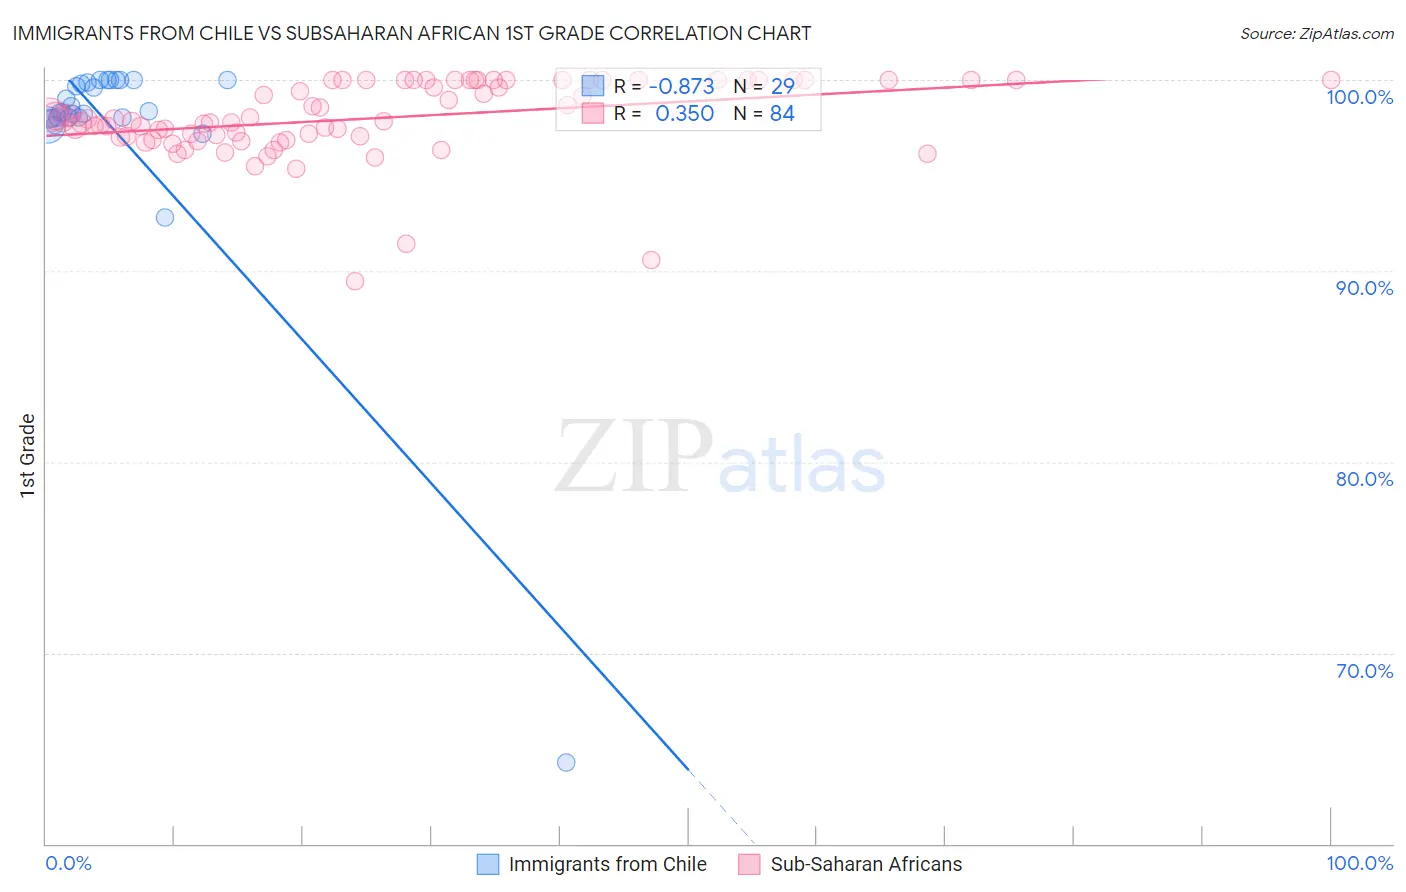 Immigrants from Chile vs Subsaharan African 1st Grade